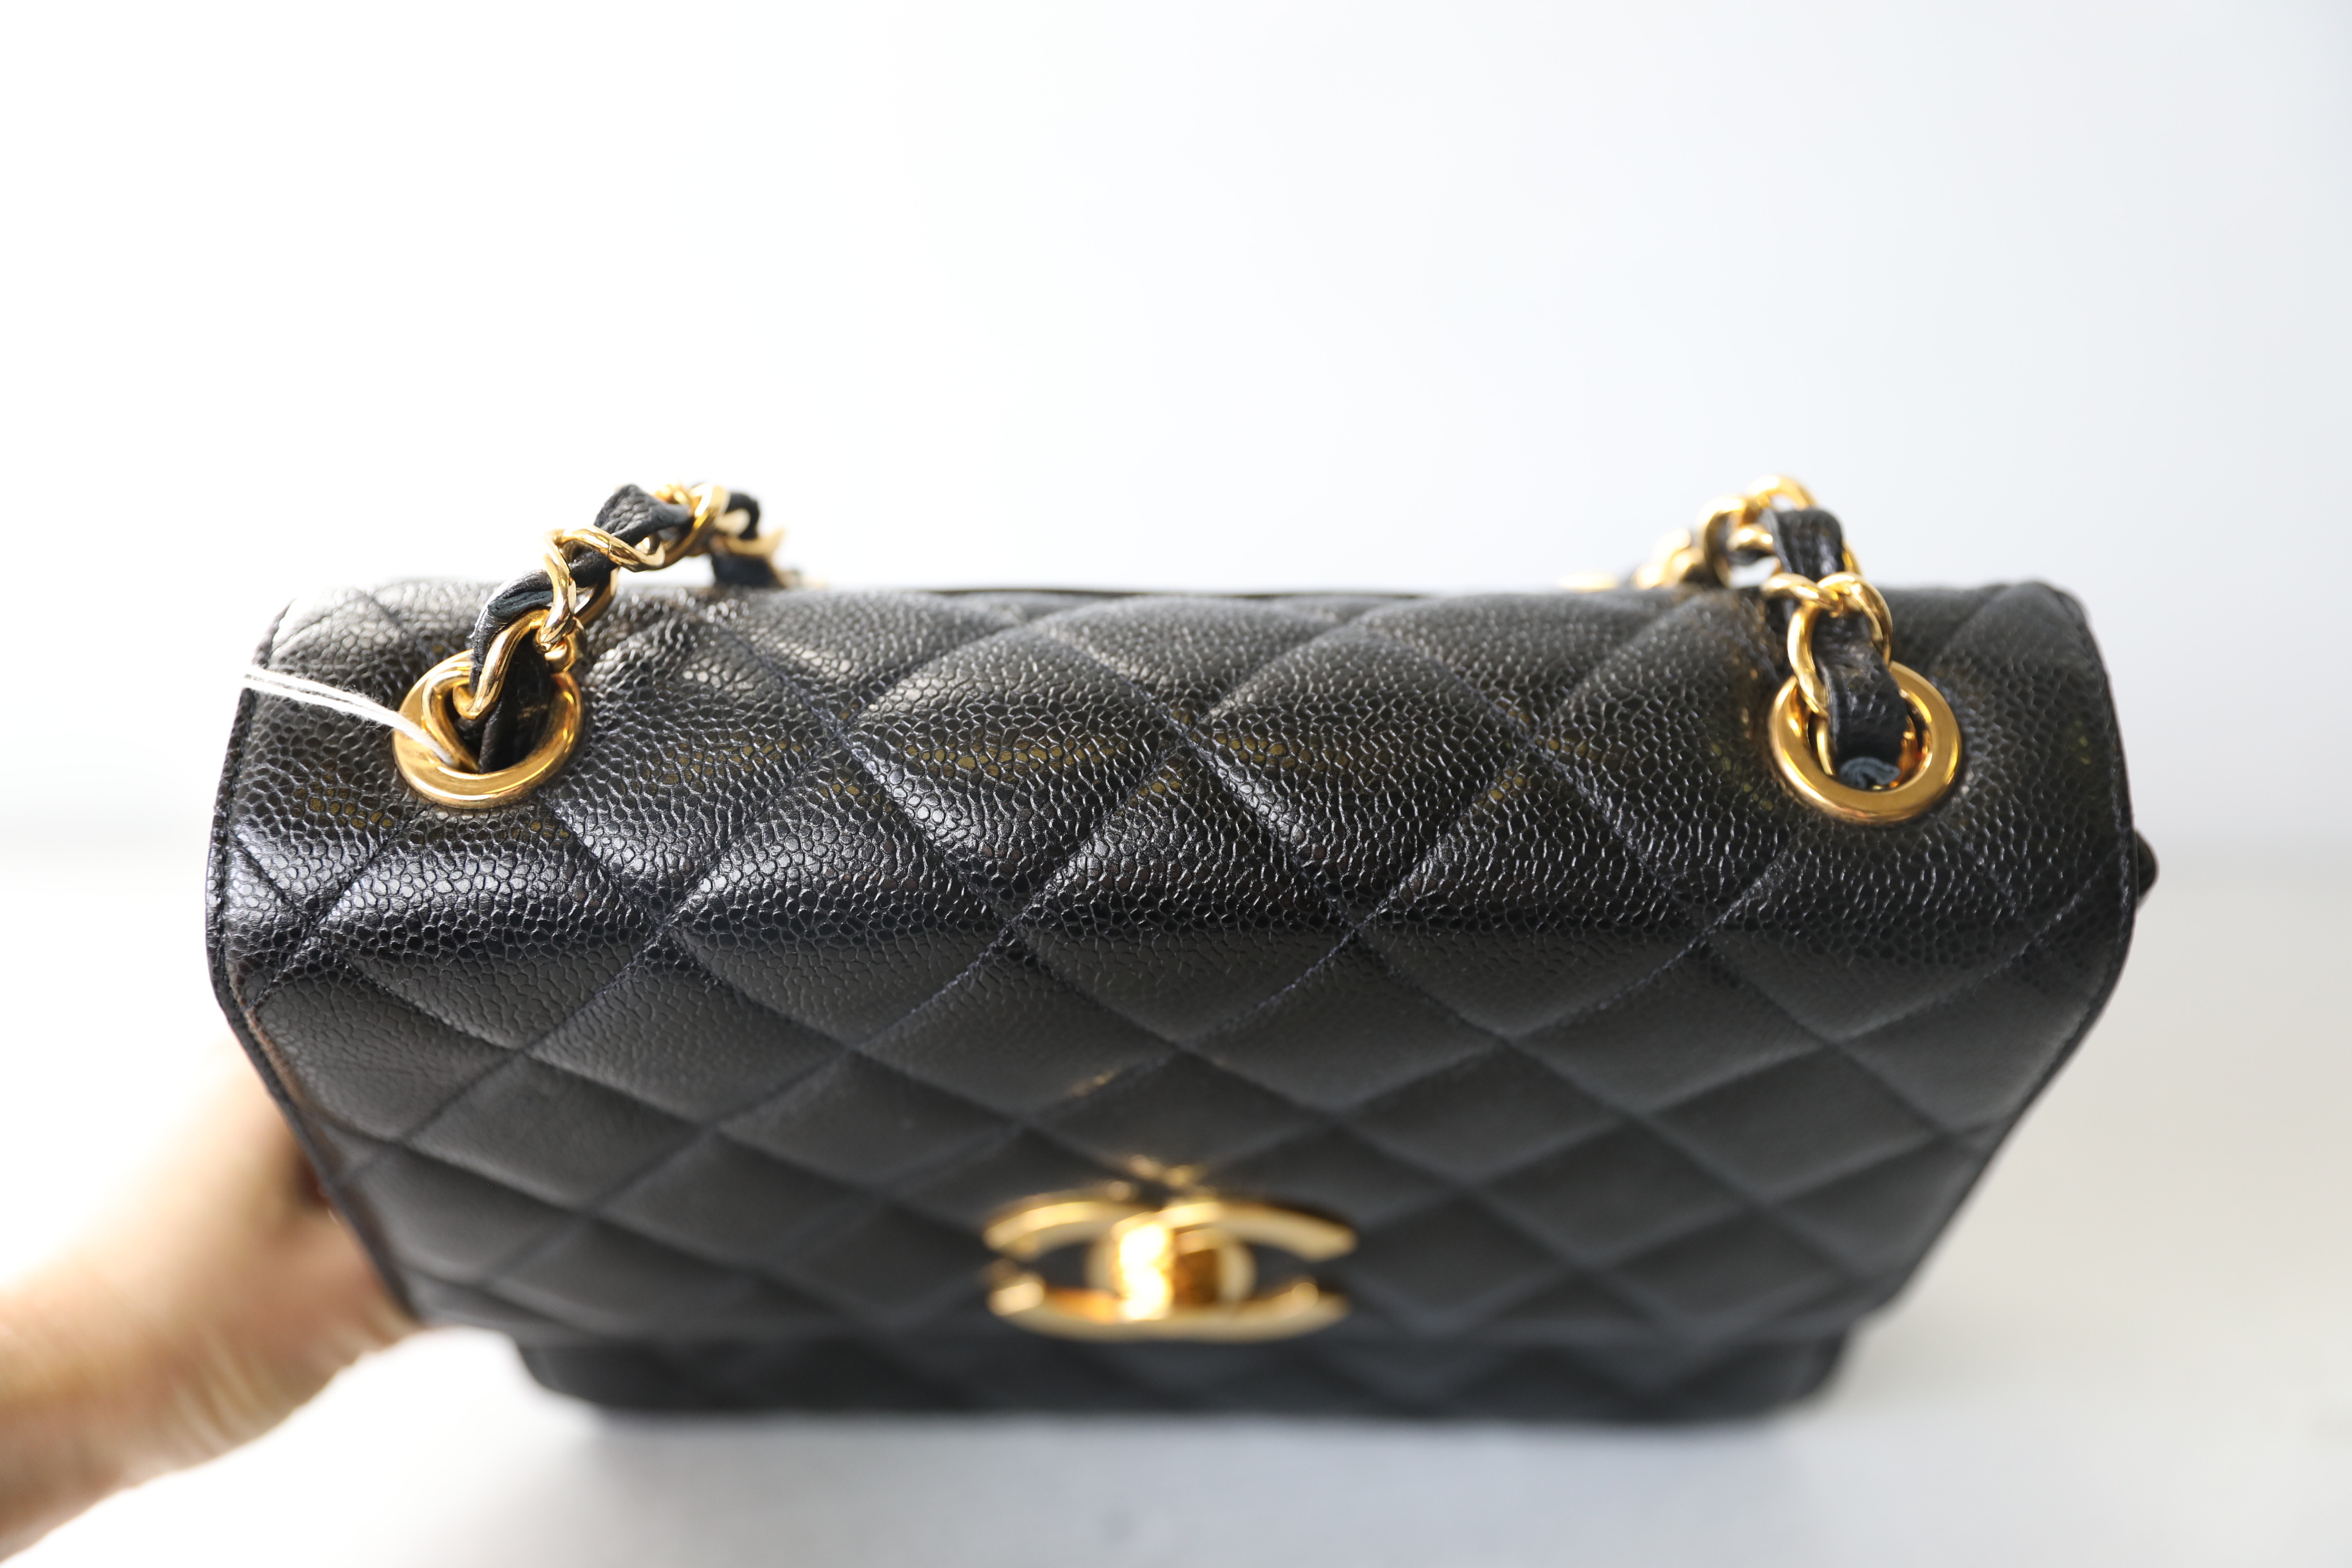 Chanel Vintage Camera Bag Beige Quilted Lambskin with 24K gold plated  hardware